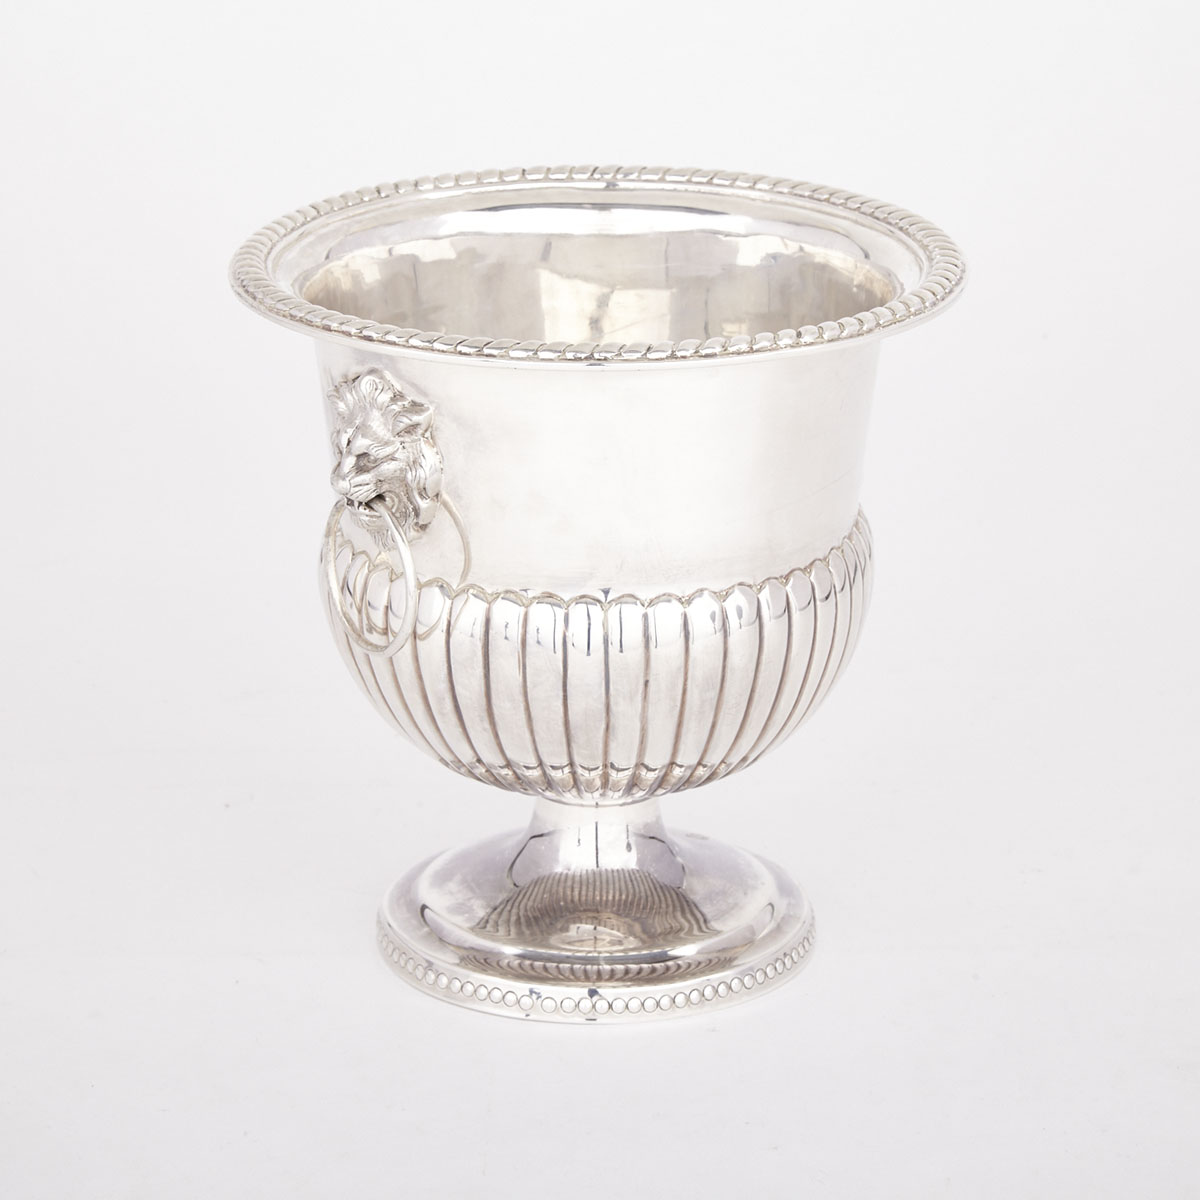 Mexican Silver Wine Cooler, Sanborns, Mexico City, mid-20th century